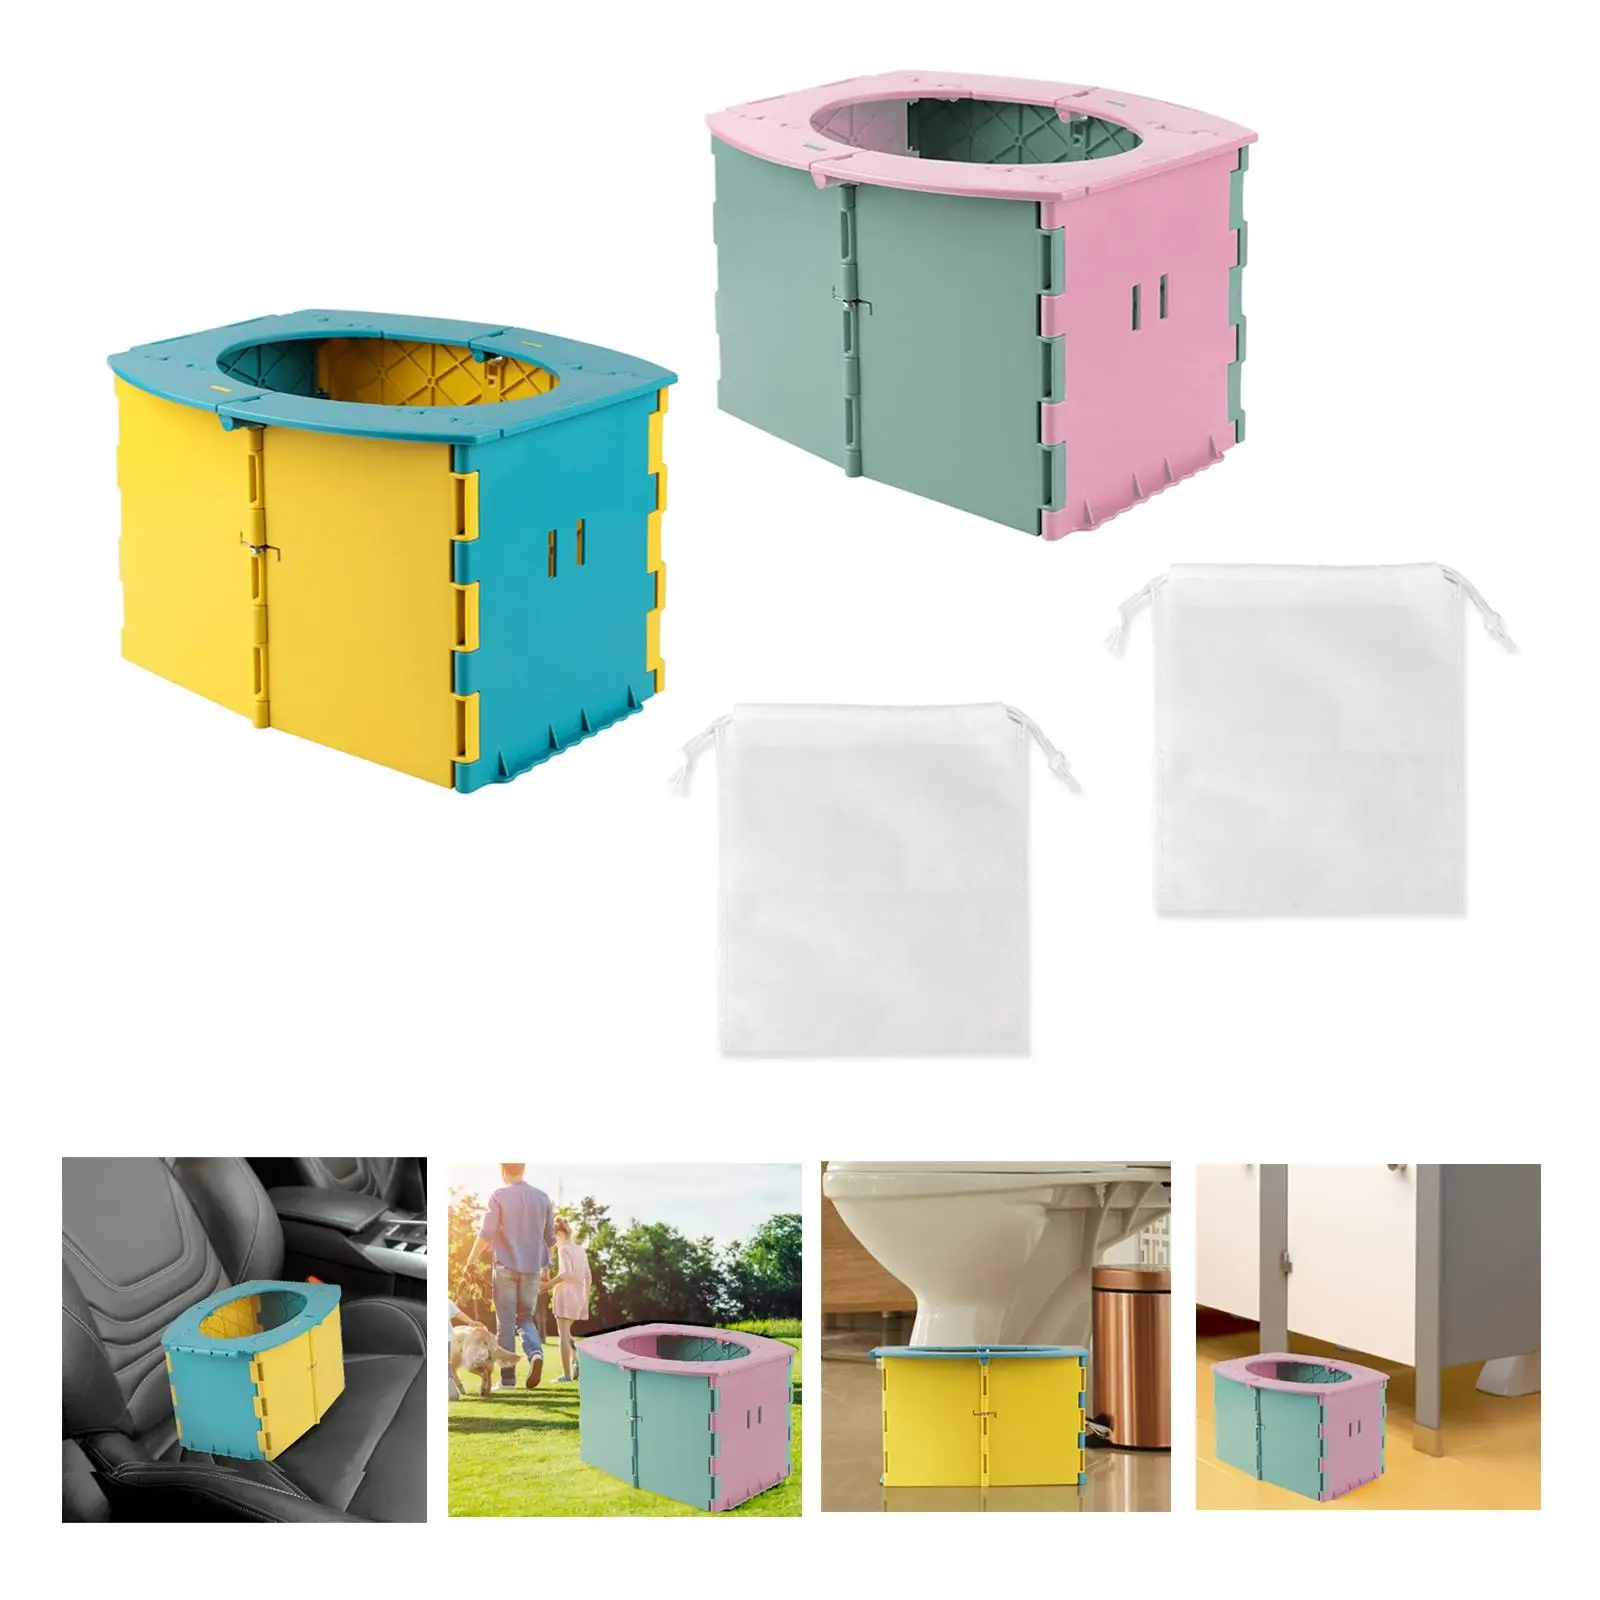 Lightweight Camping Toilet Potty Chair Bucket Toilet Car Toilet Travel Toilet for Hiking Outdoor Travel Camping Trip